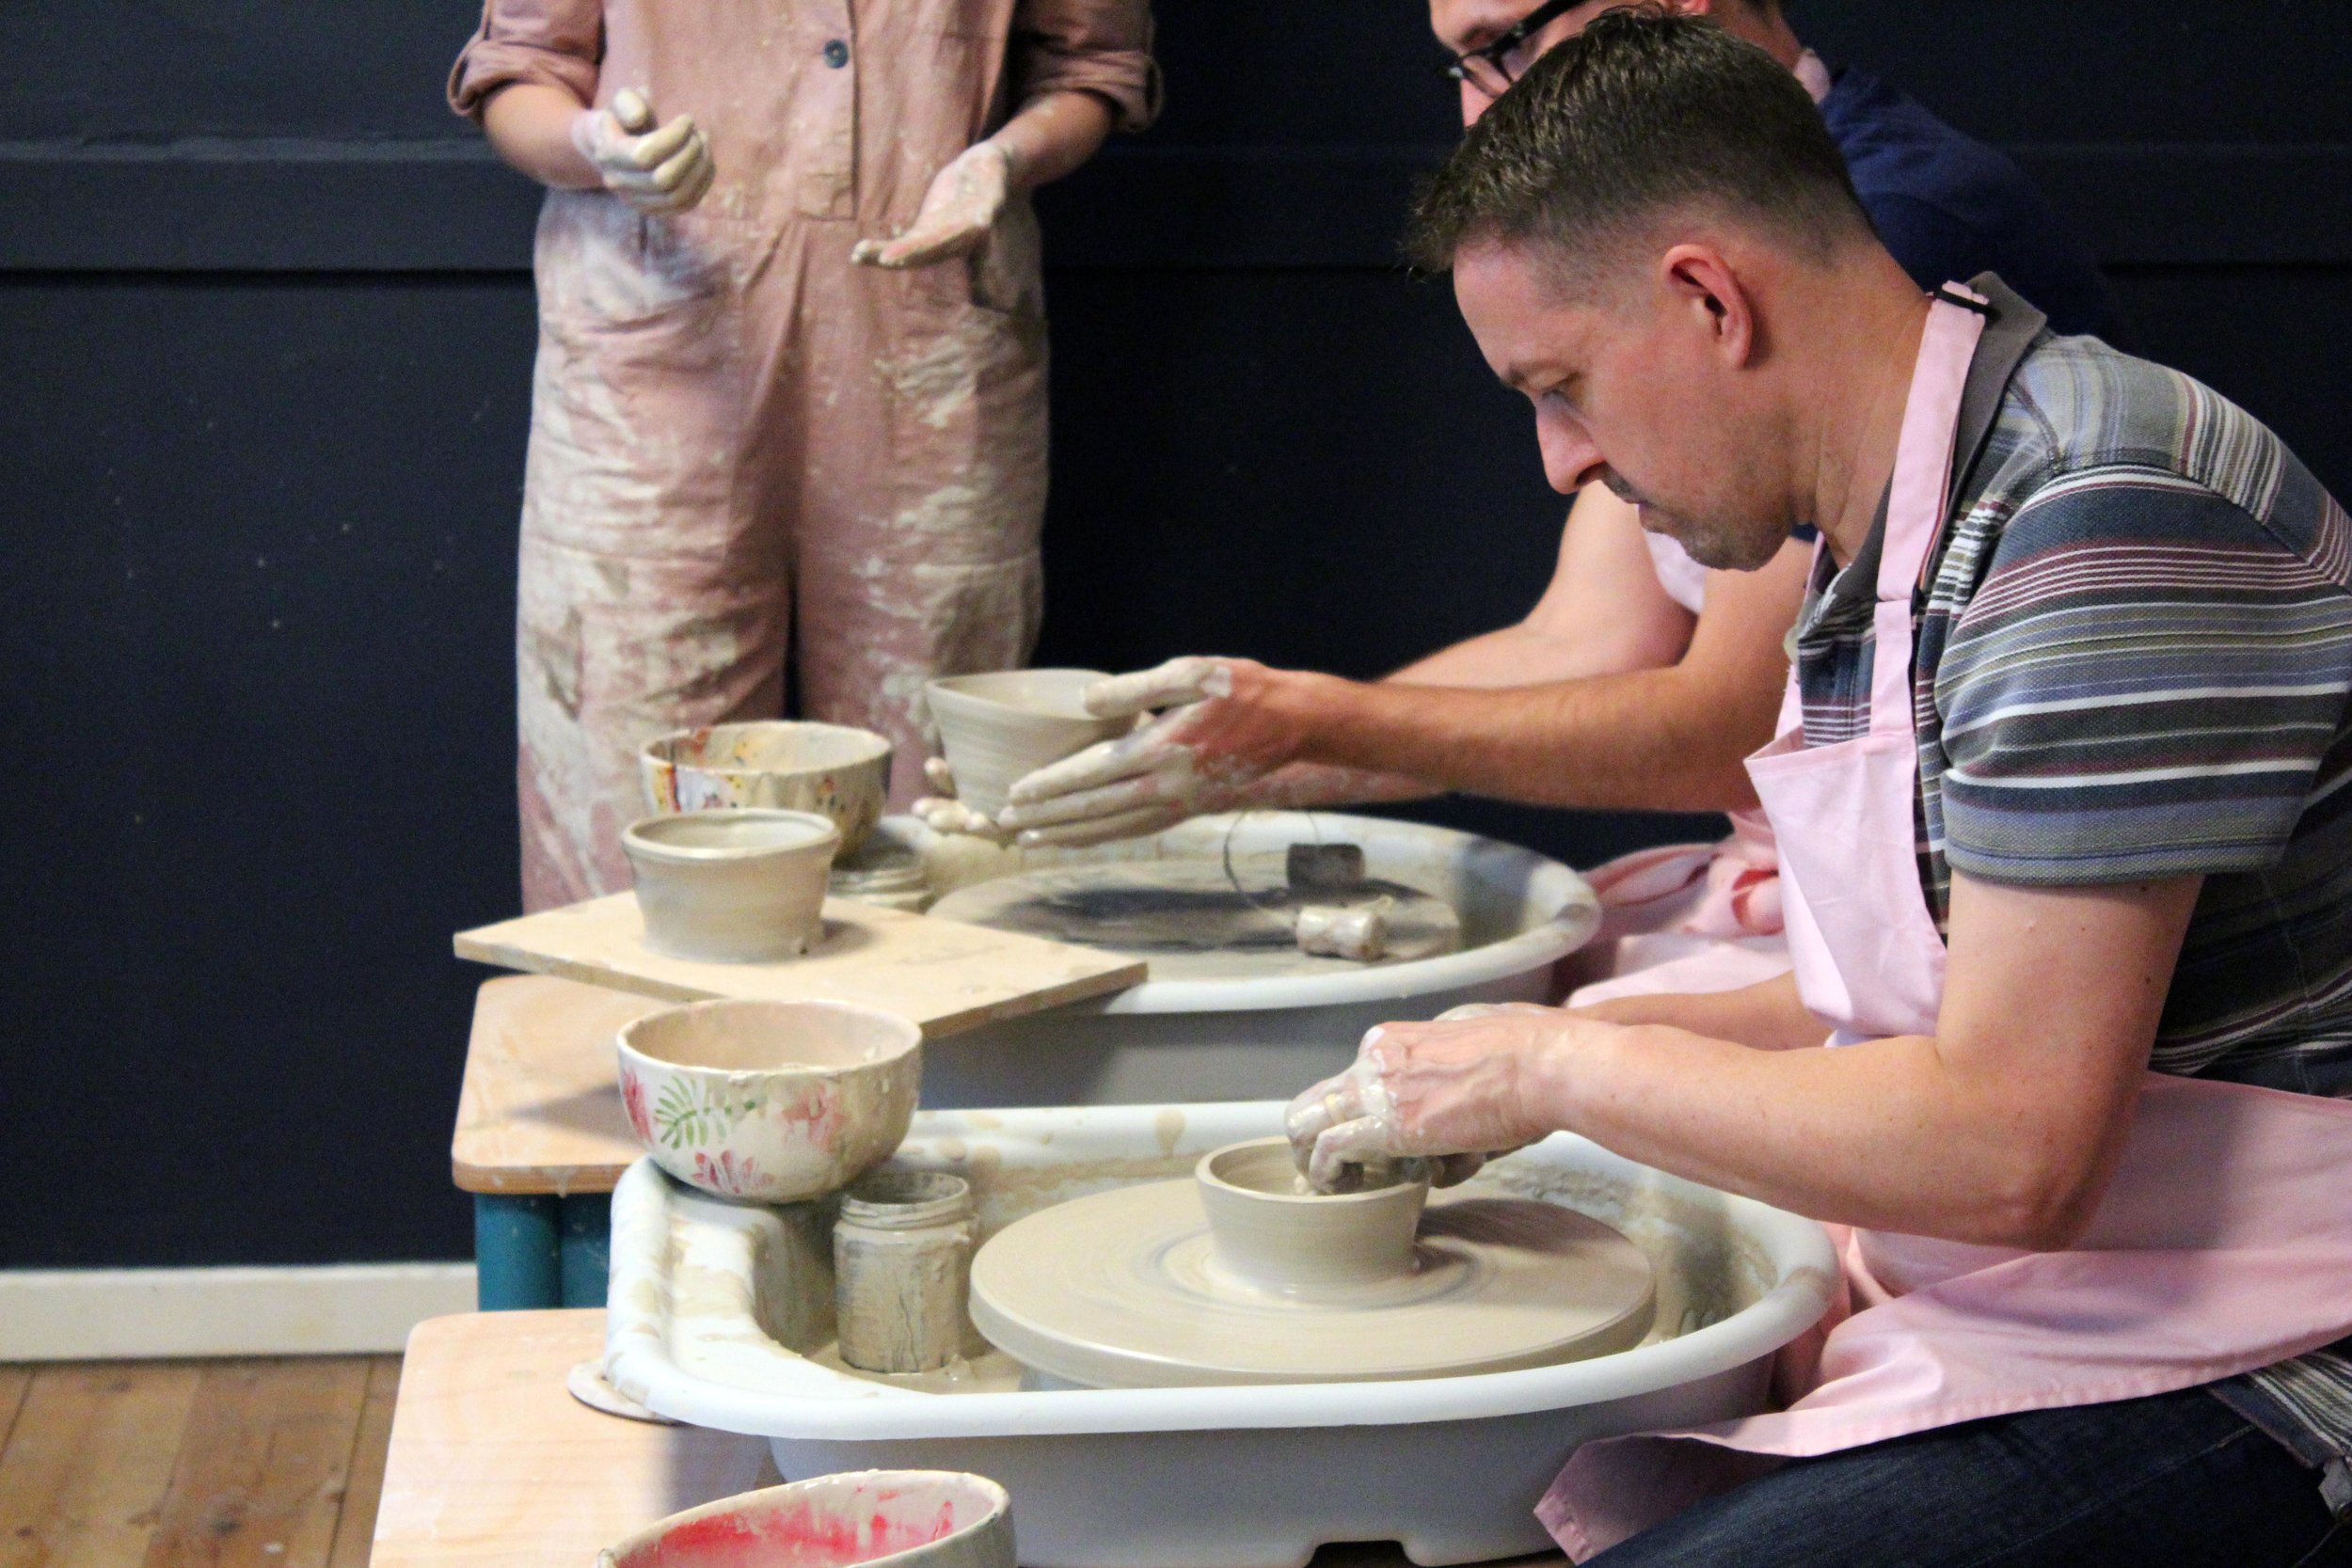 Pottery Workshops Fill Up as People Travel to Connect Over Clay